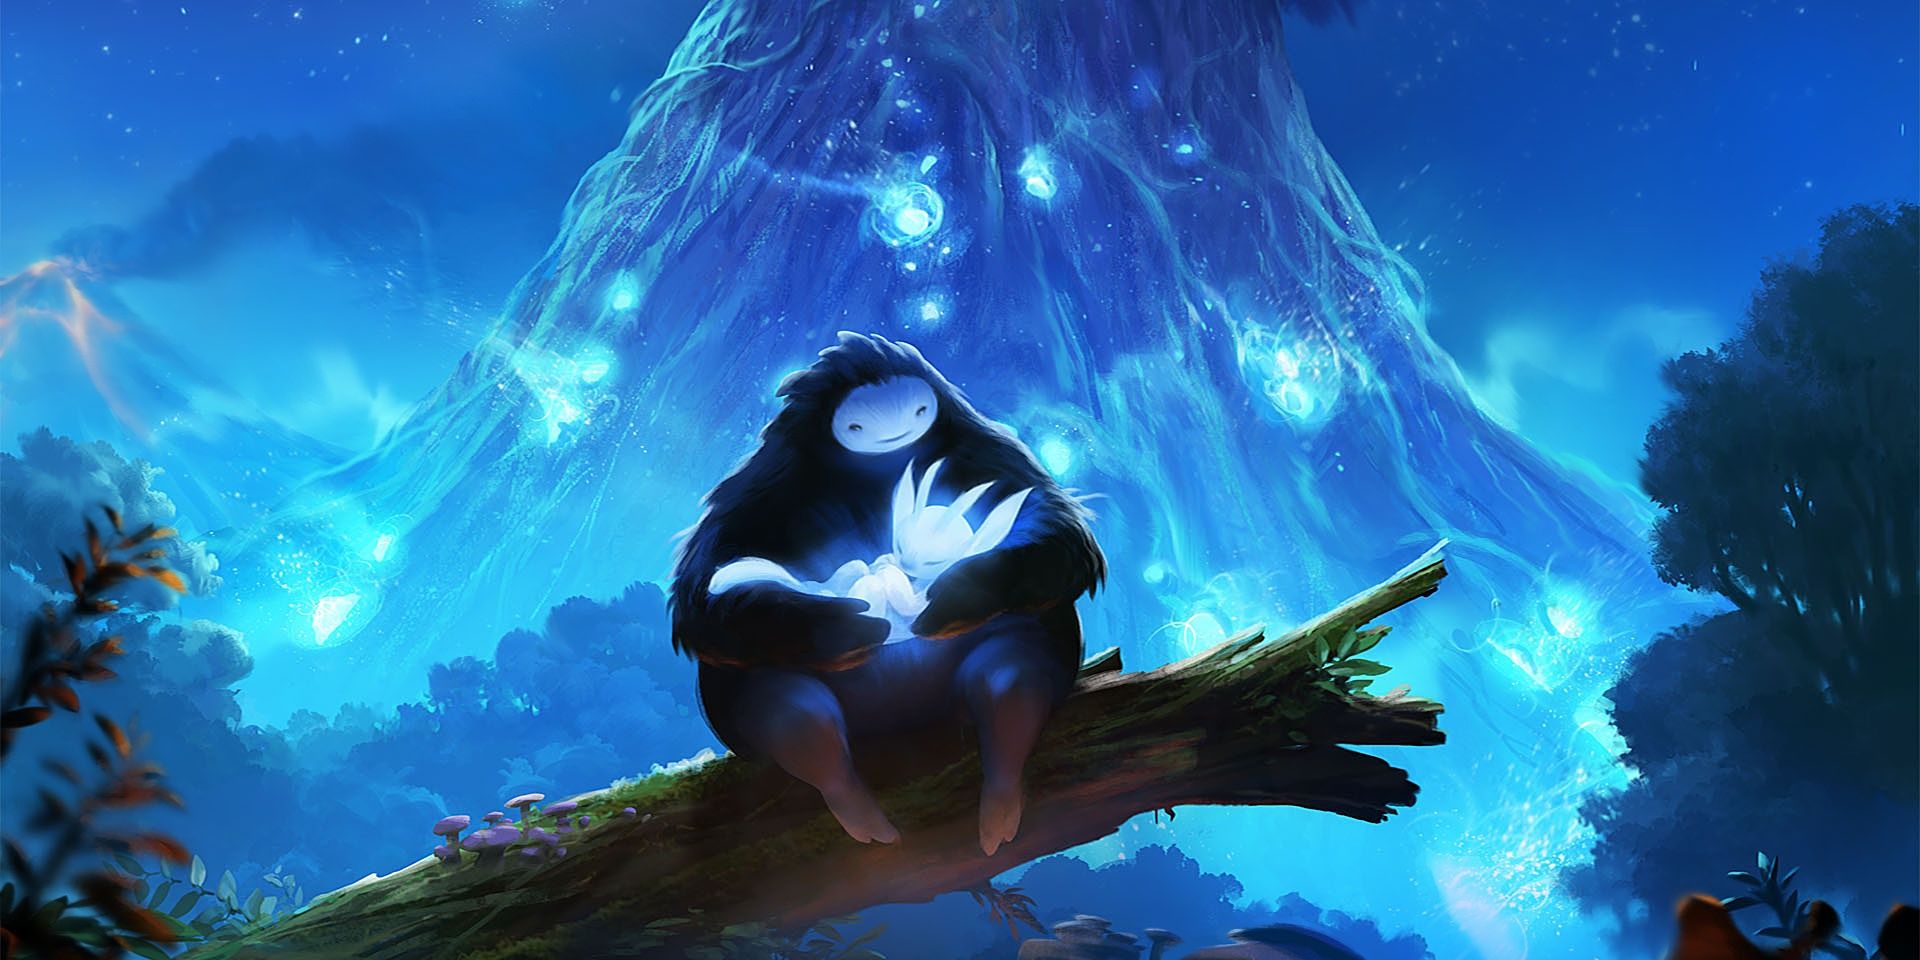 Naru holds Ori from Ori and the Blind Forest, with the spirit tree glowing behind them